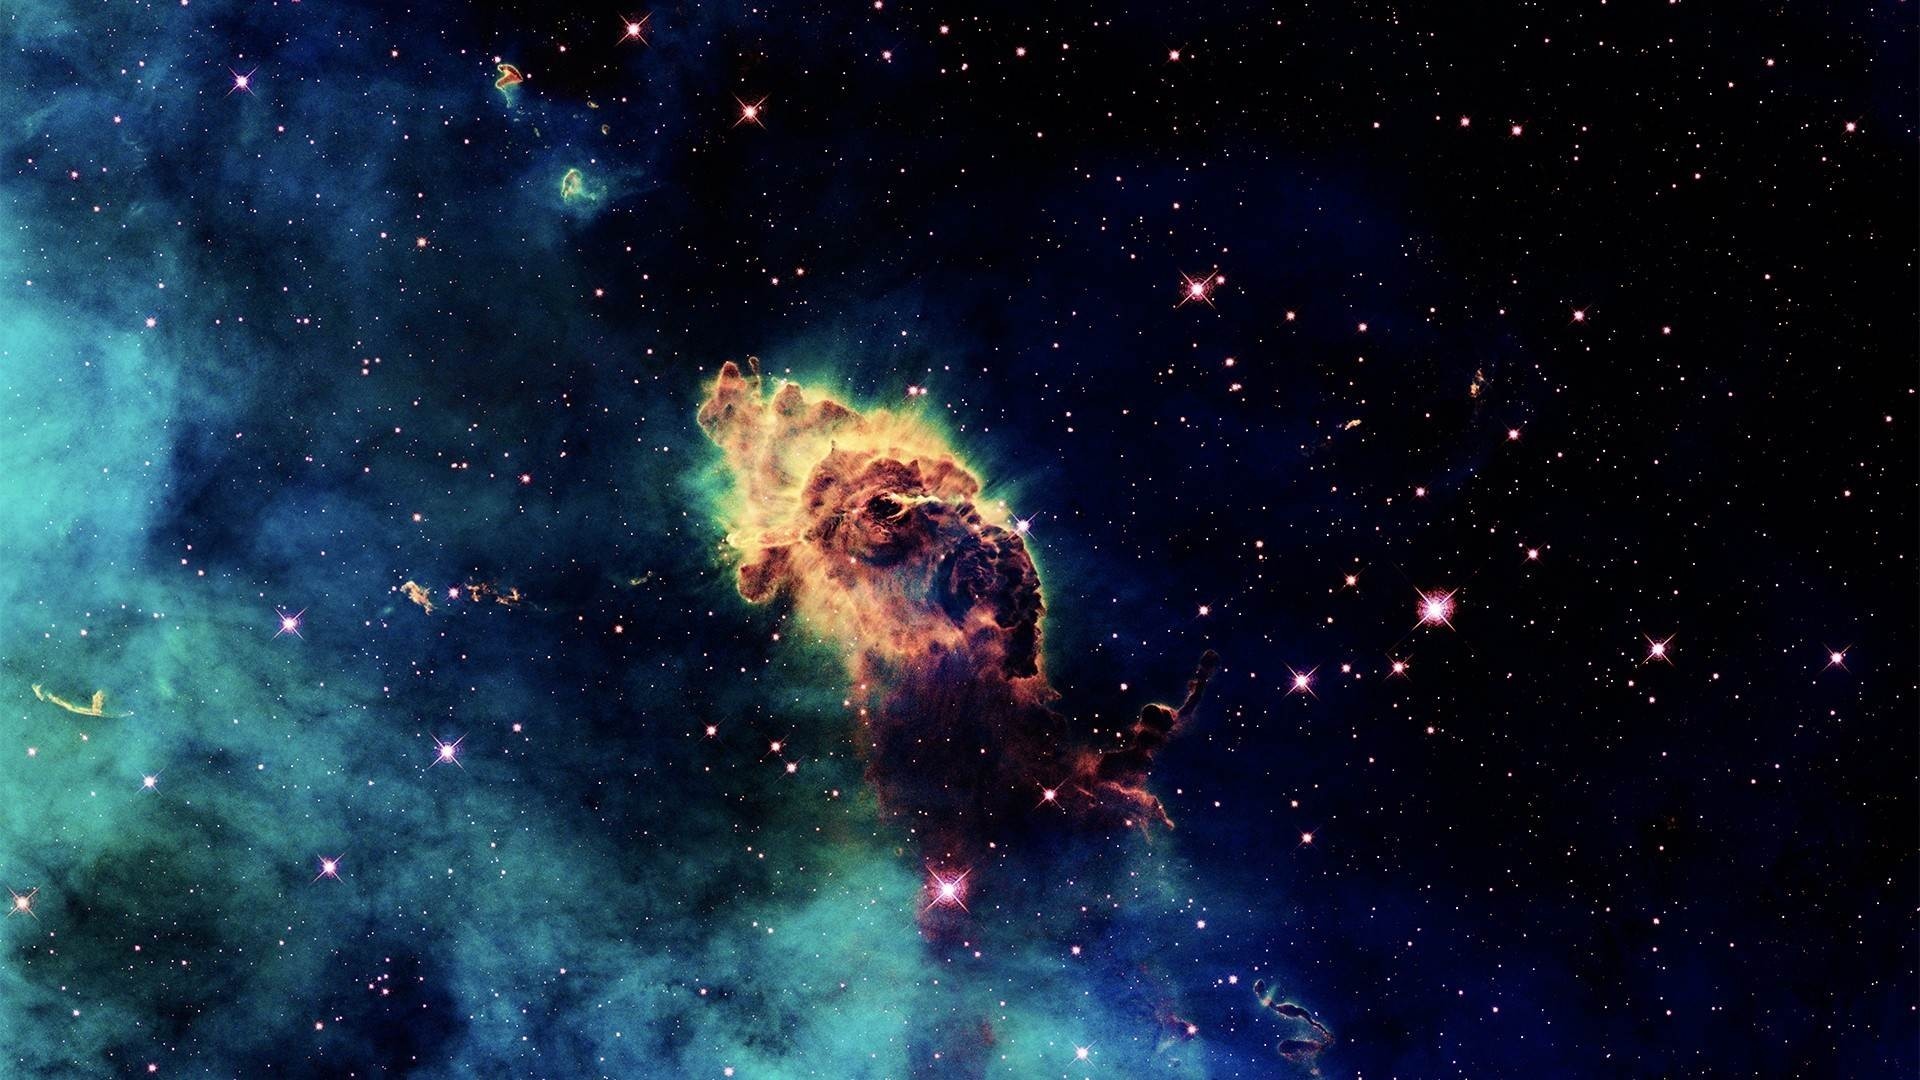 1920x1080  Nasa Space Pictures Hd Images 3 HD Wallpapers | amagico.com